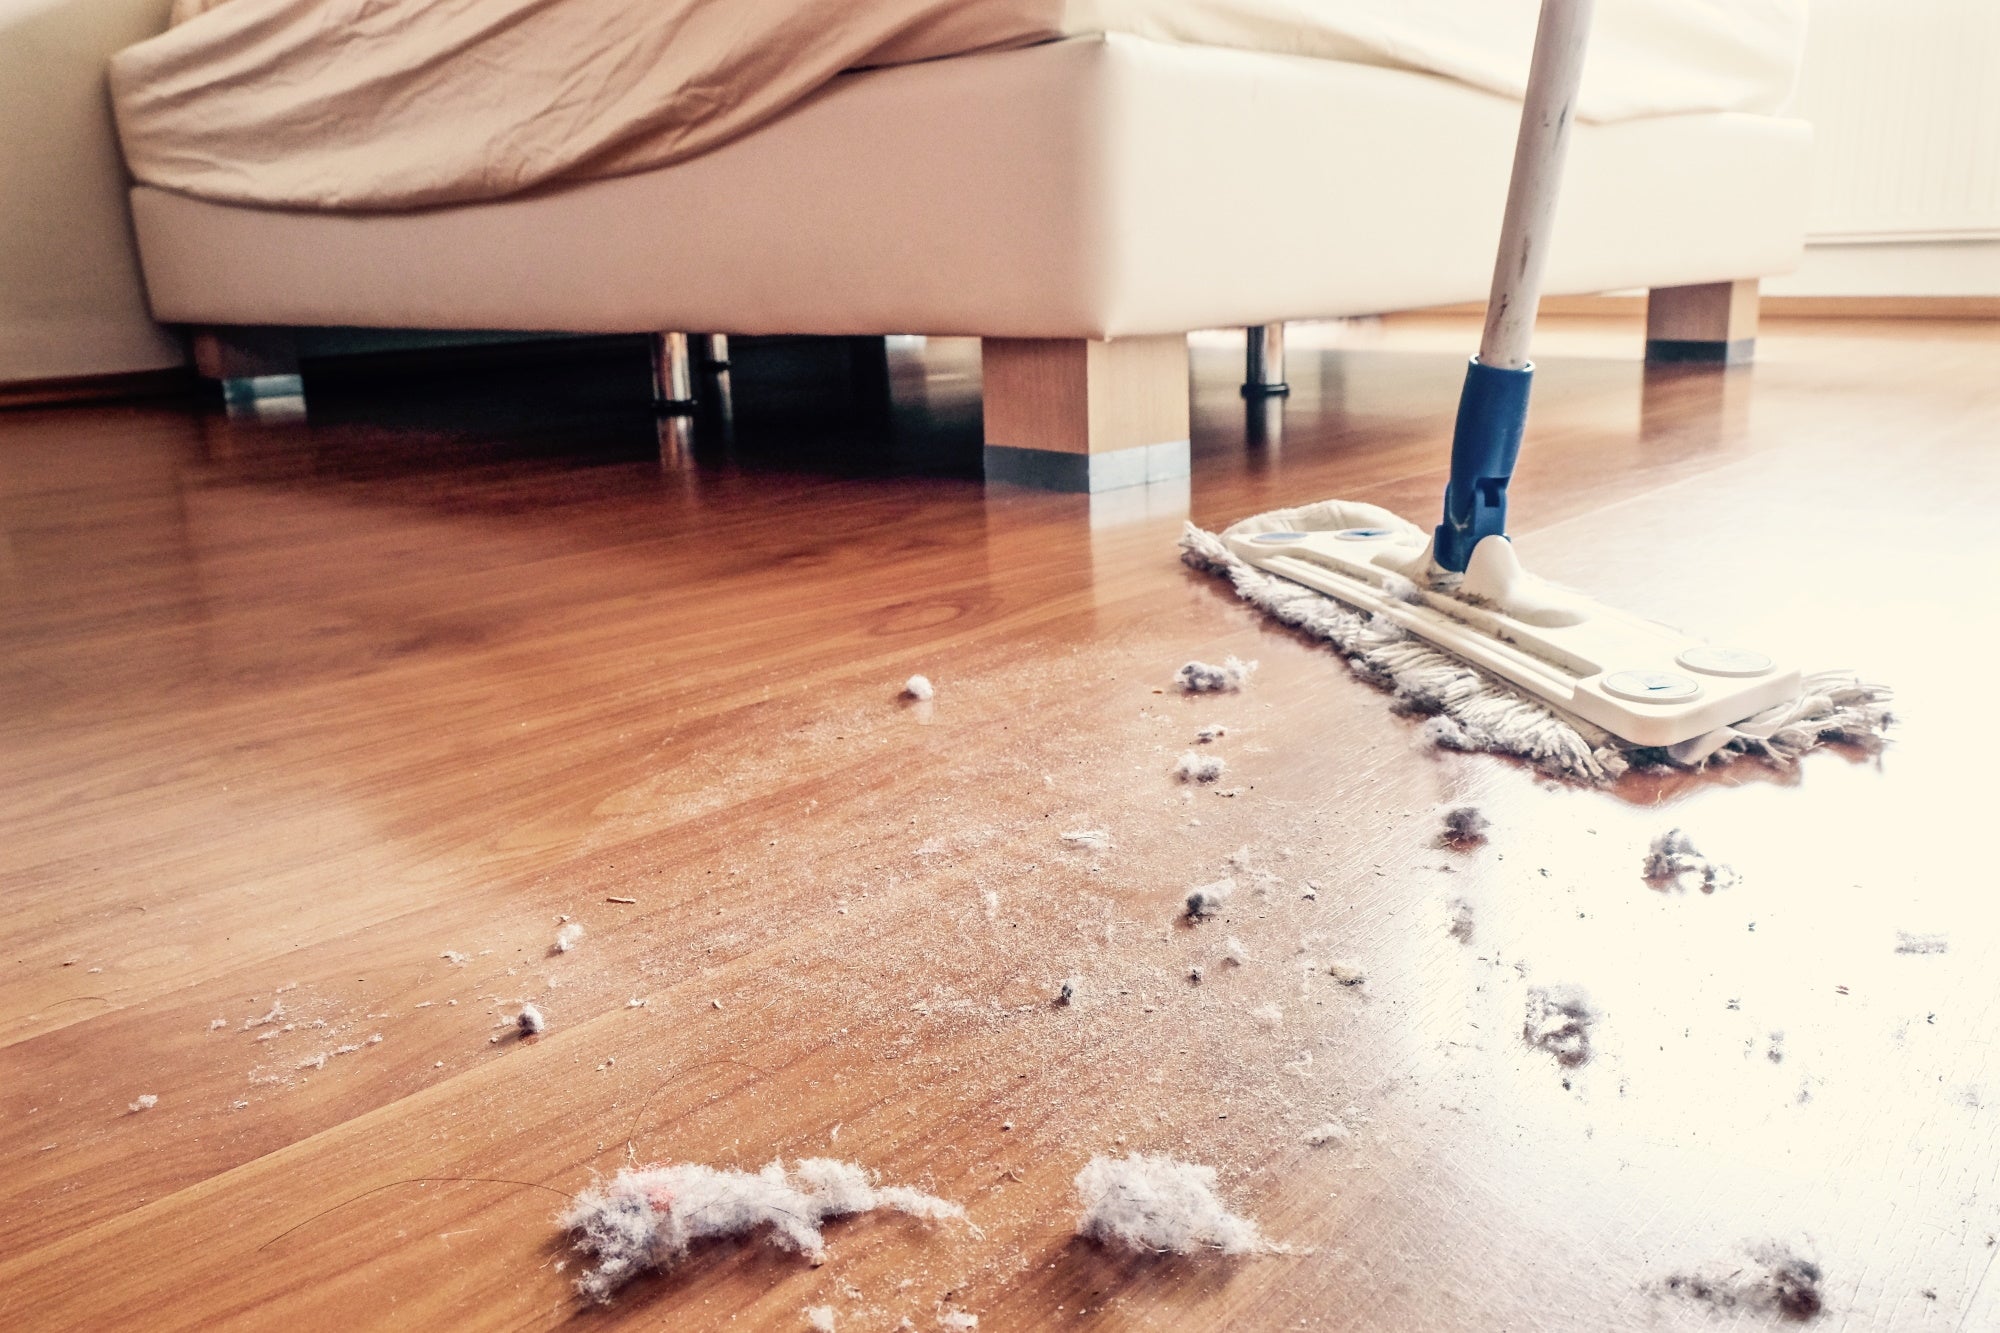 Large dust clumps being swept up by mop on hardwood floor